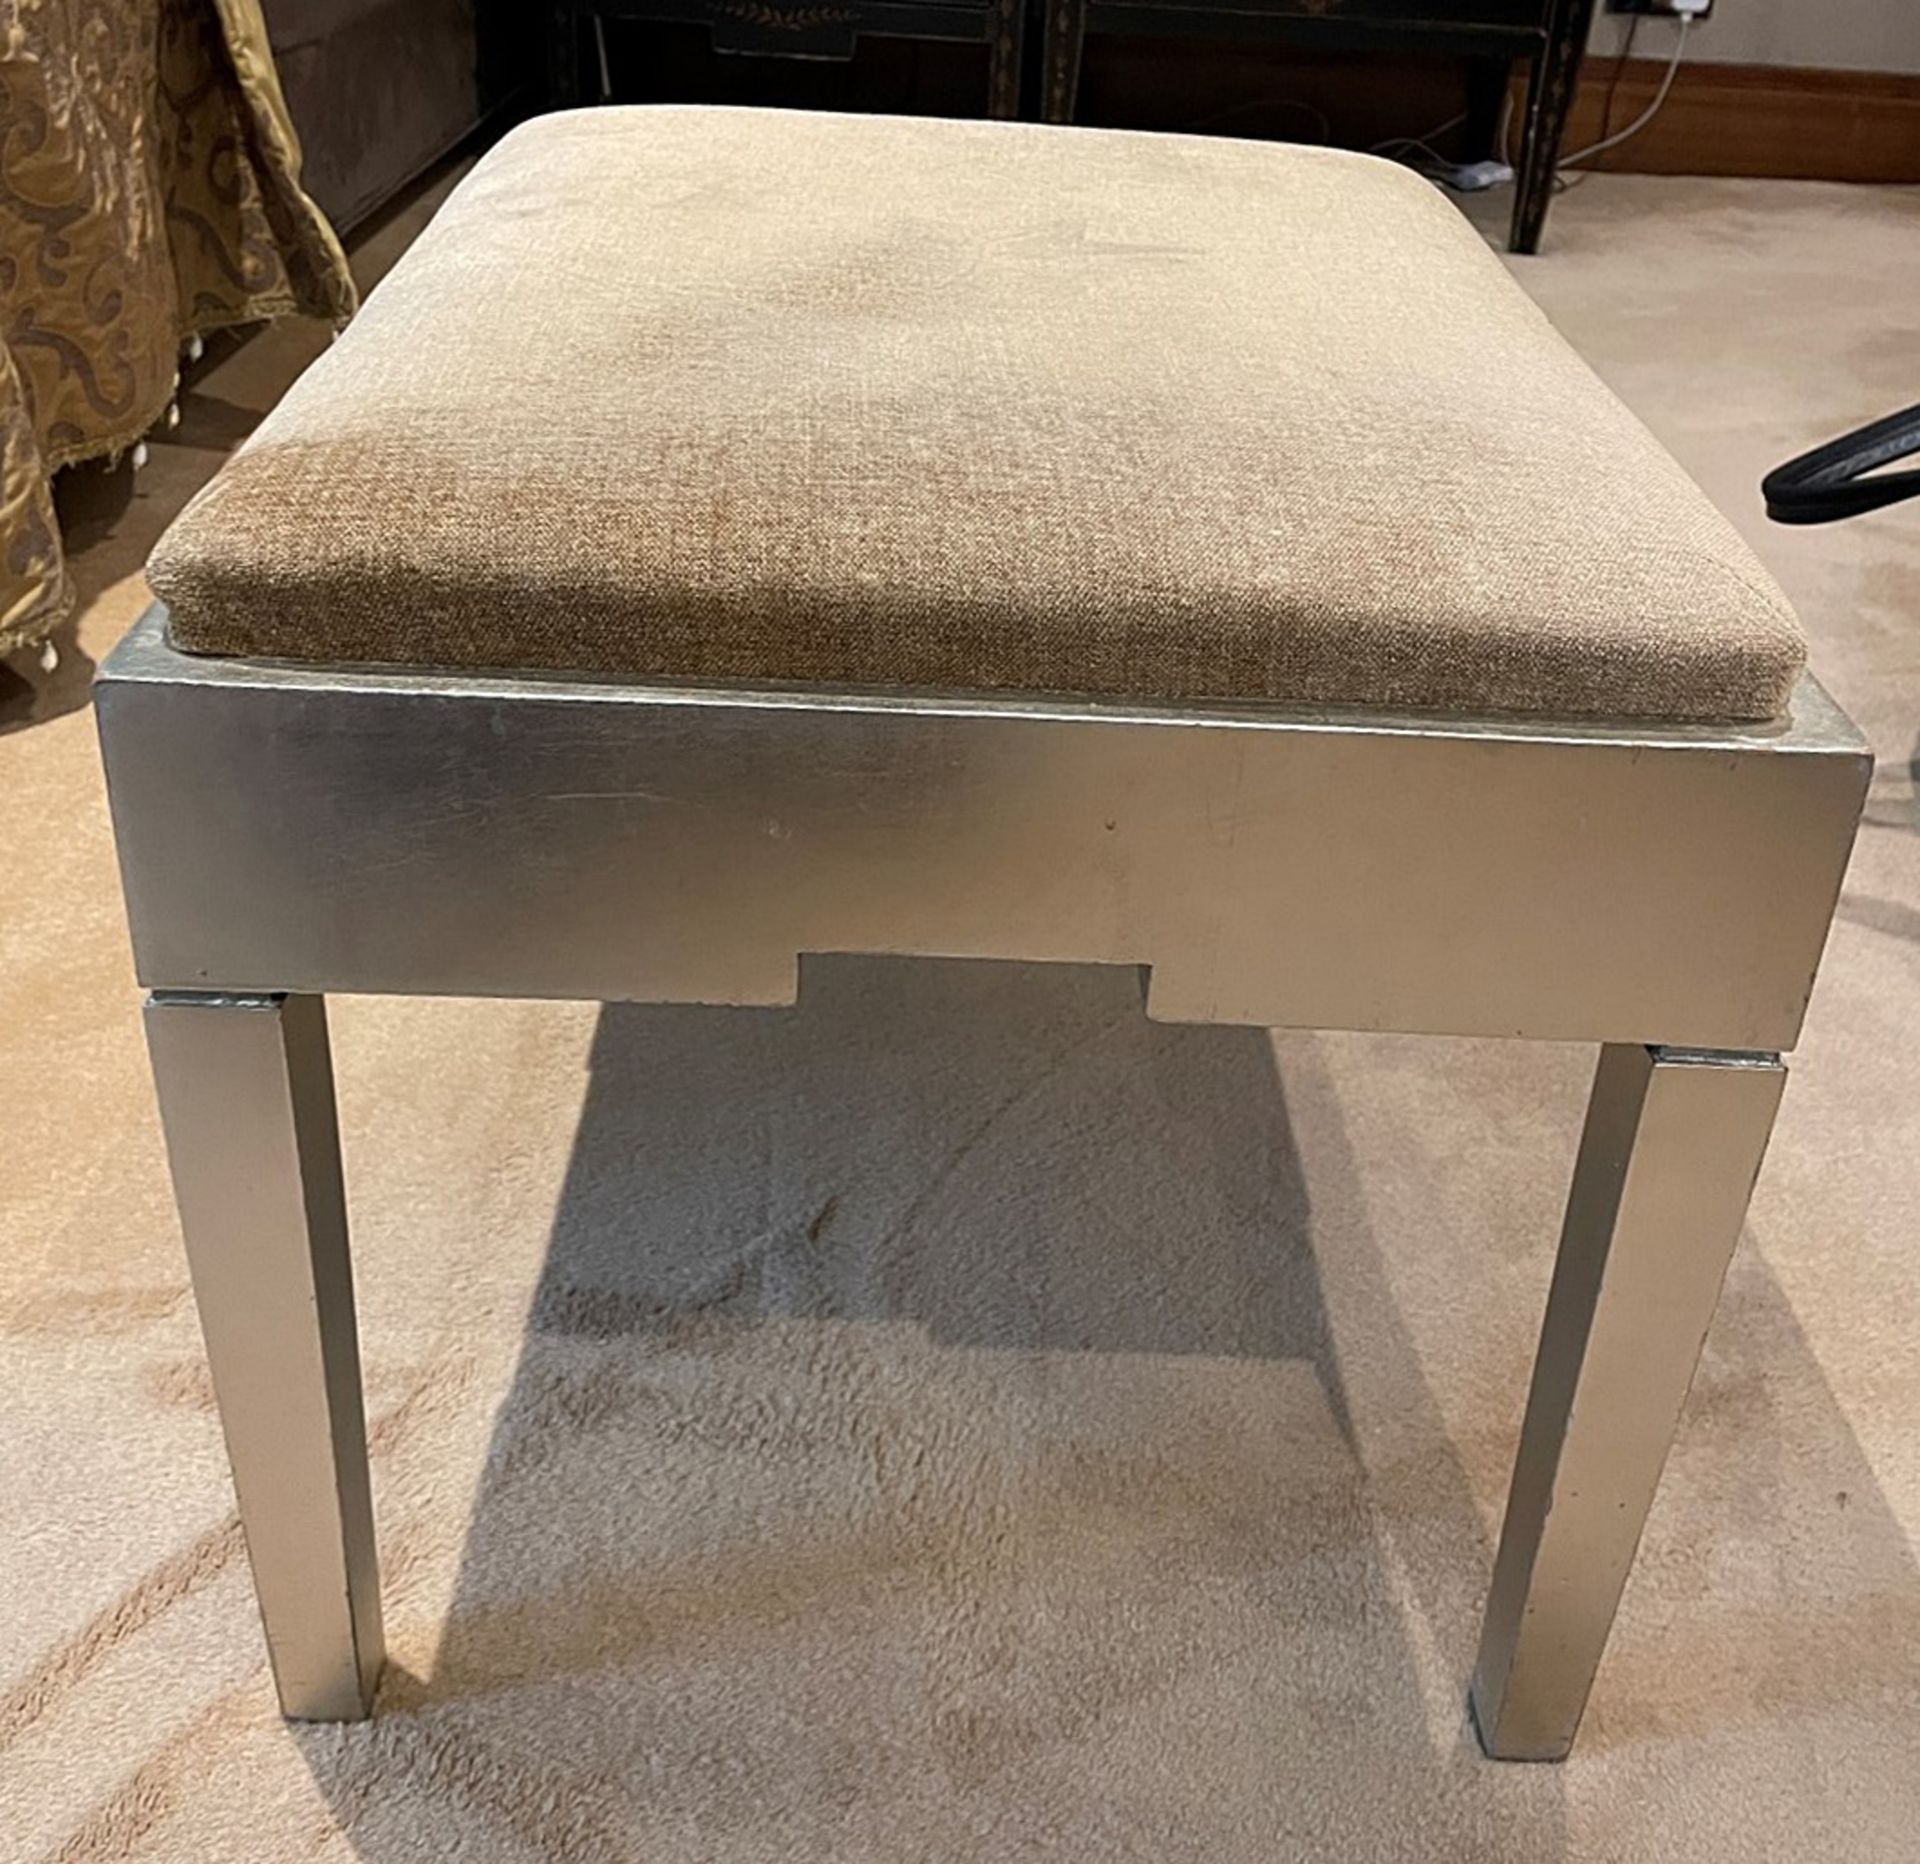 1 x Dressing Room Stool With An Upholstered Seat And Silver Painted Finish - Dimensions: 58x48x55cm - Image 5 of 5